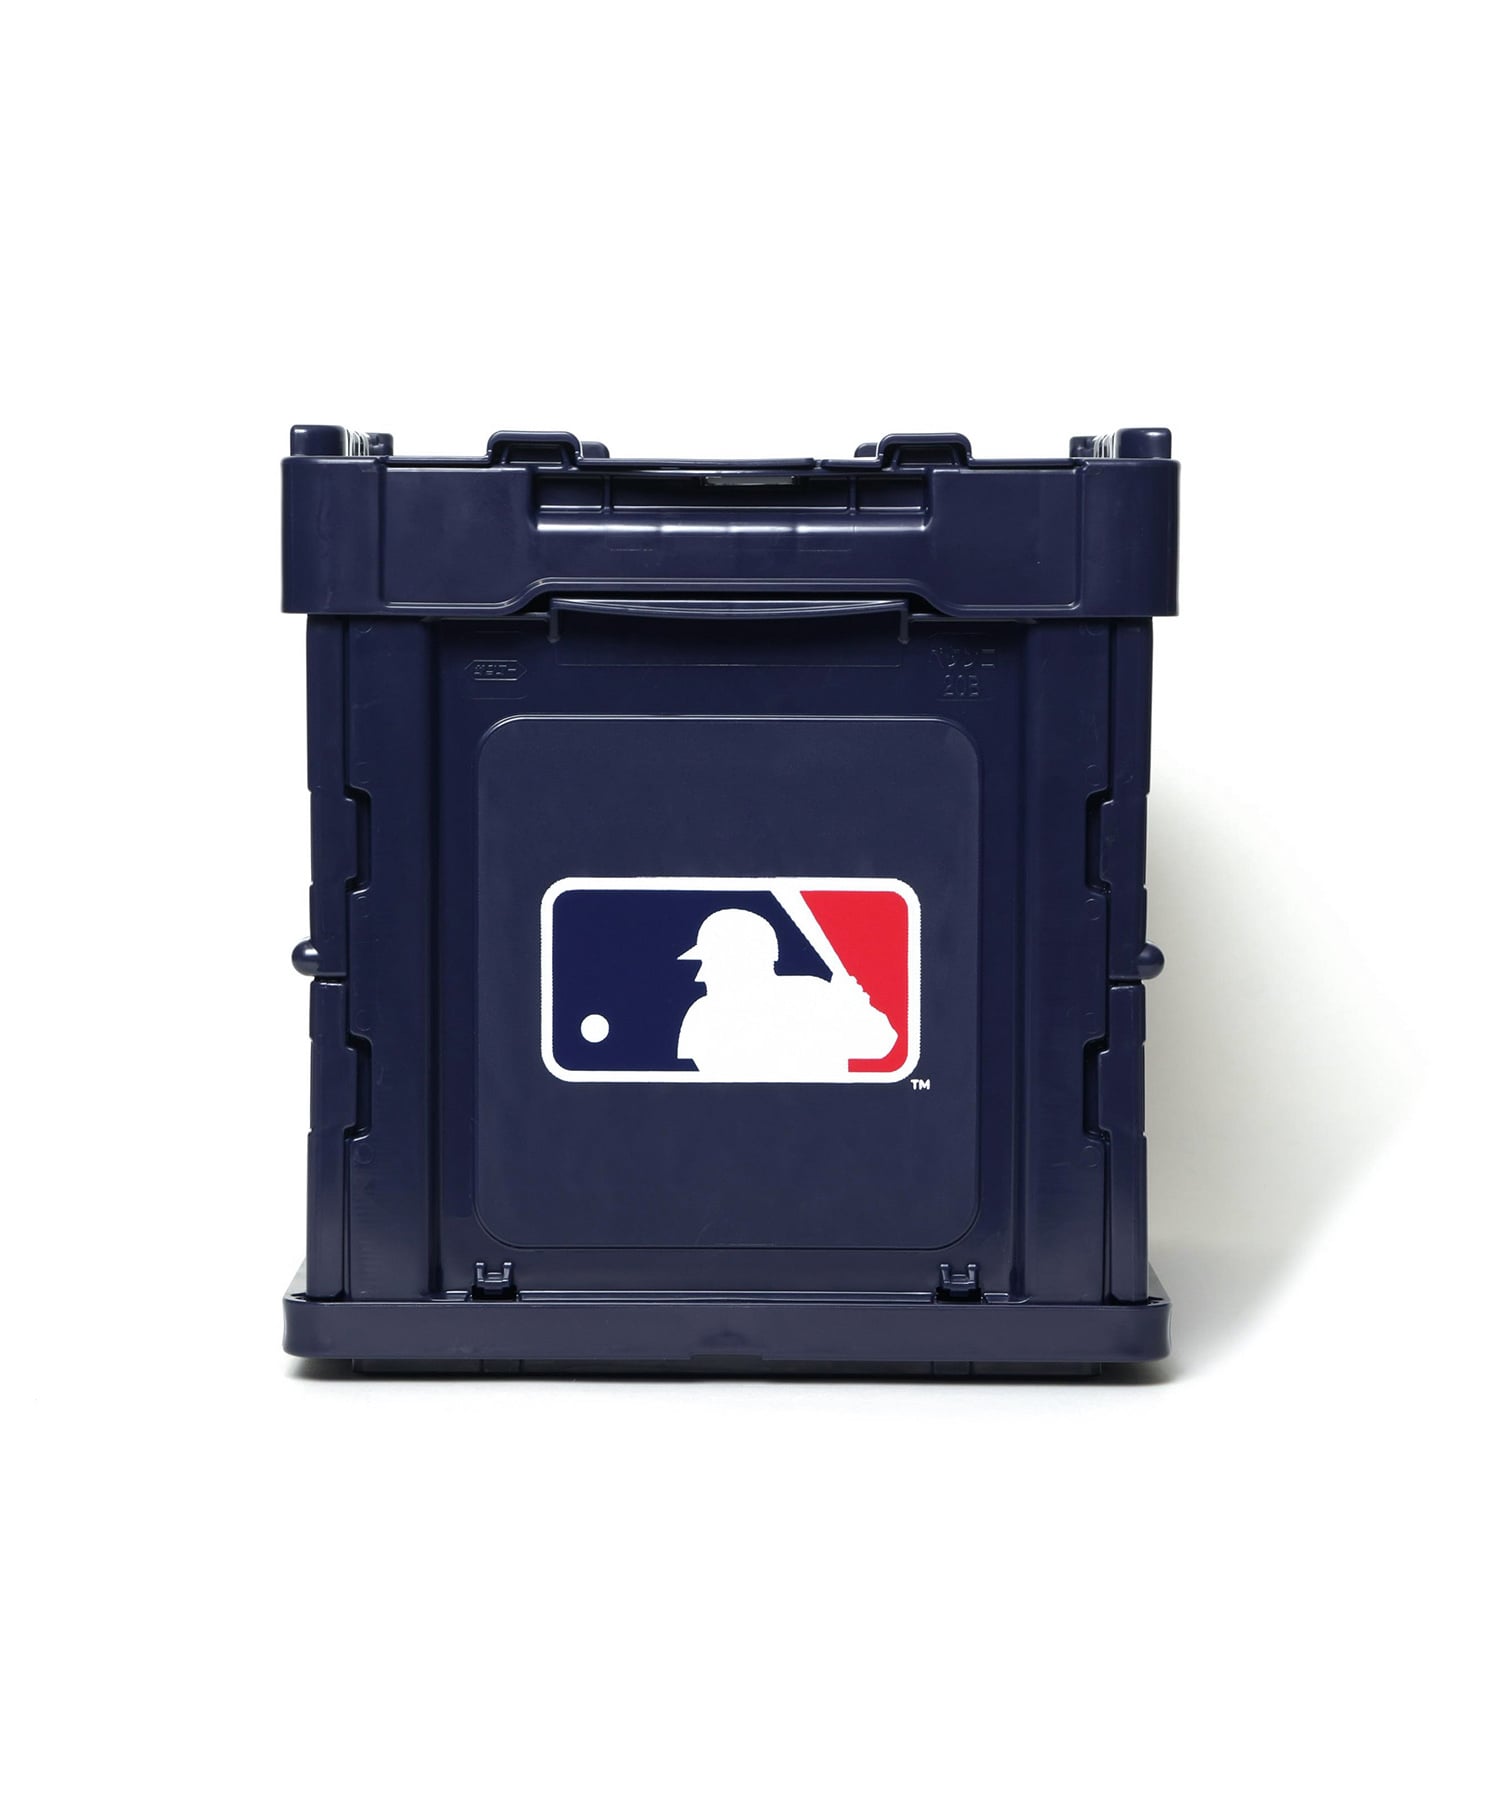 MLB TOUR SMALL FOLDABLE CONTAINER F.C.Real Bristol